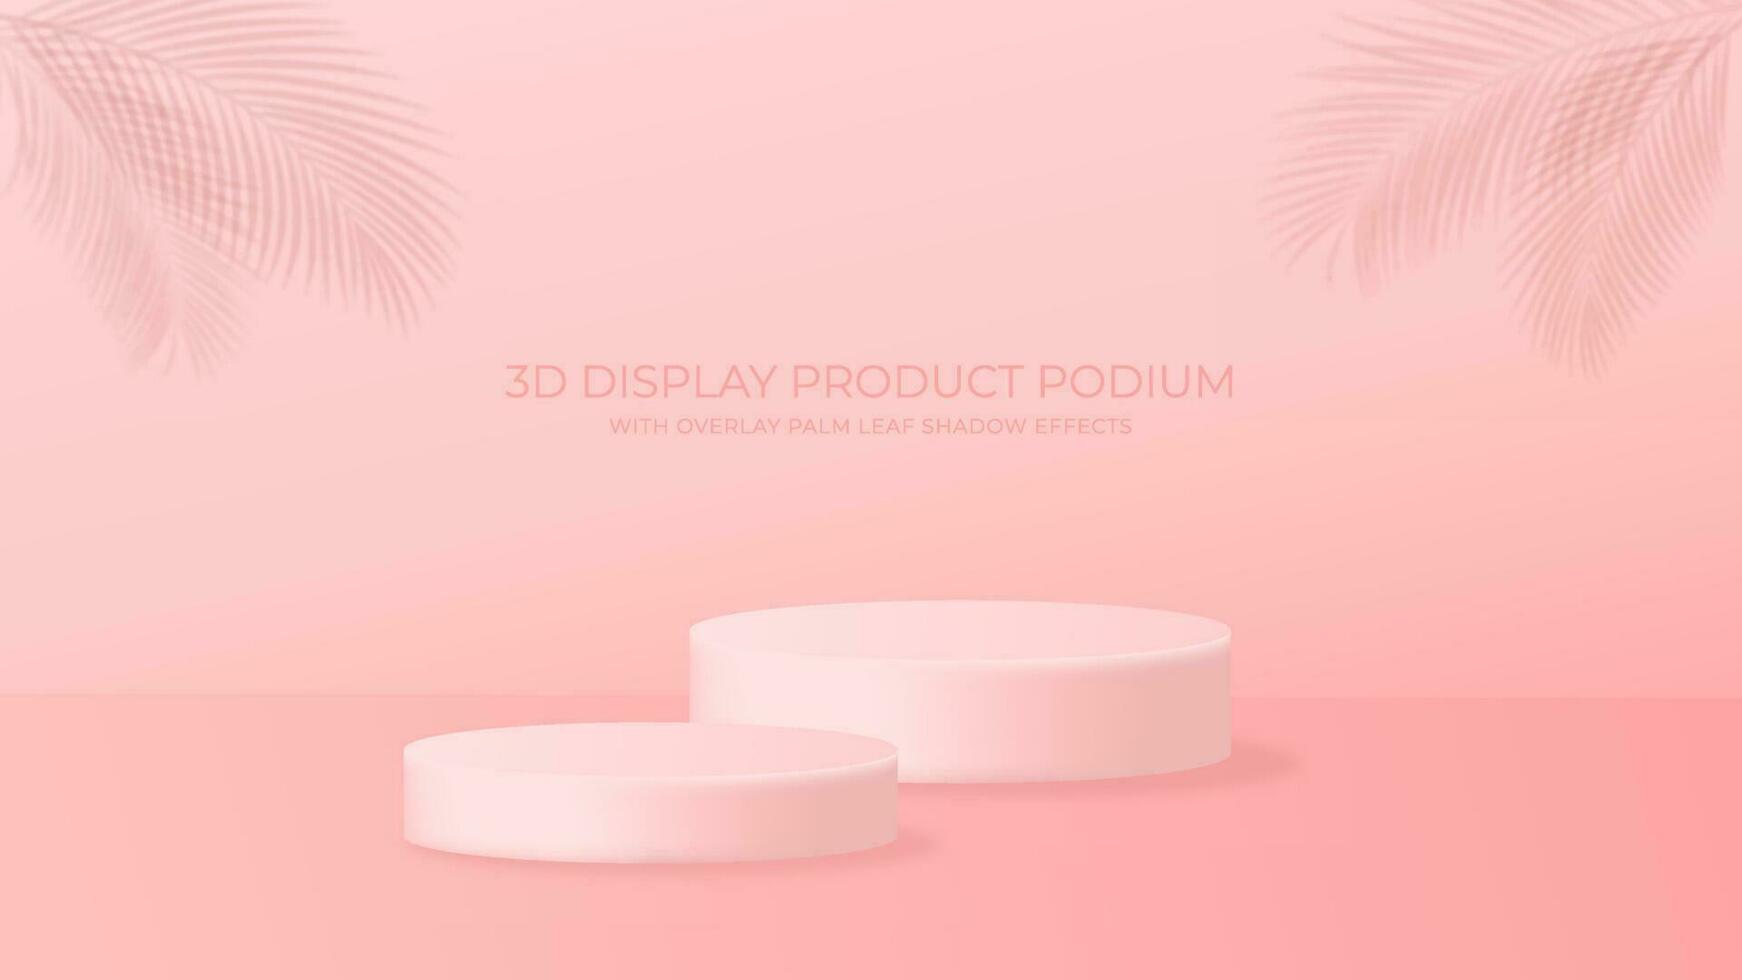 3D Display Product Podium Platform Decorated With Overlay Palm Leaf Shadow Effects. Suitable for Display Promotion Product Fashion, Cosmetic, Beauty, Women, etc. vector